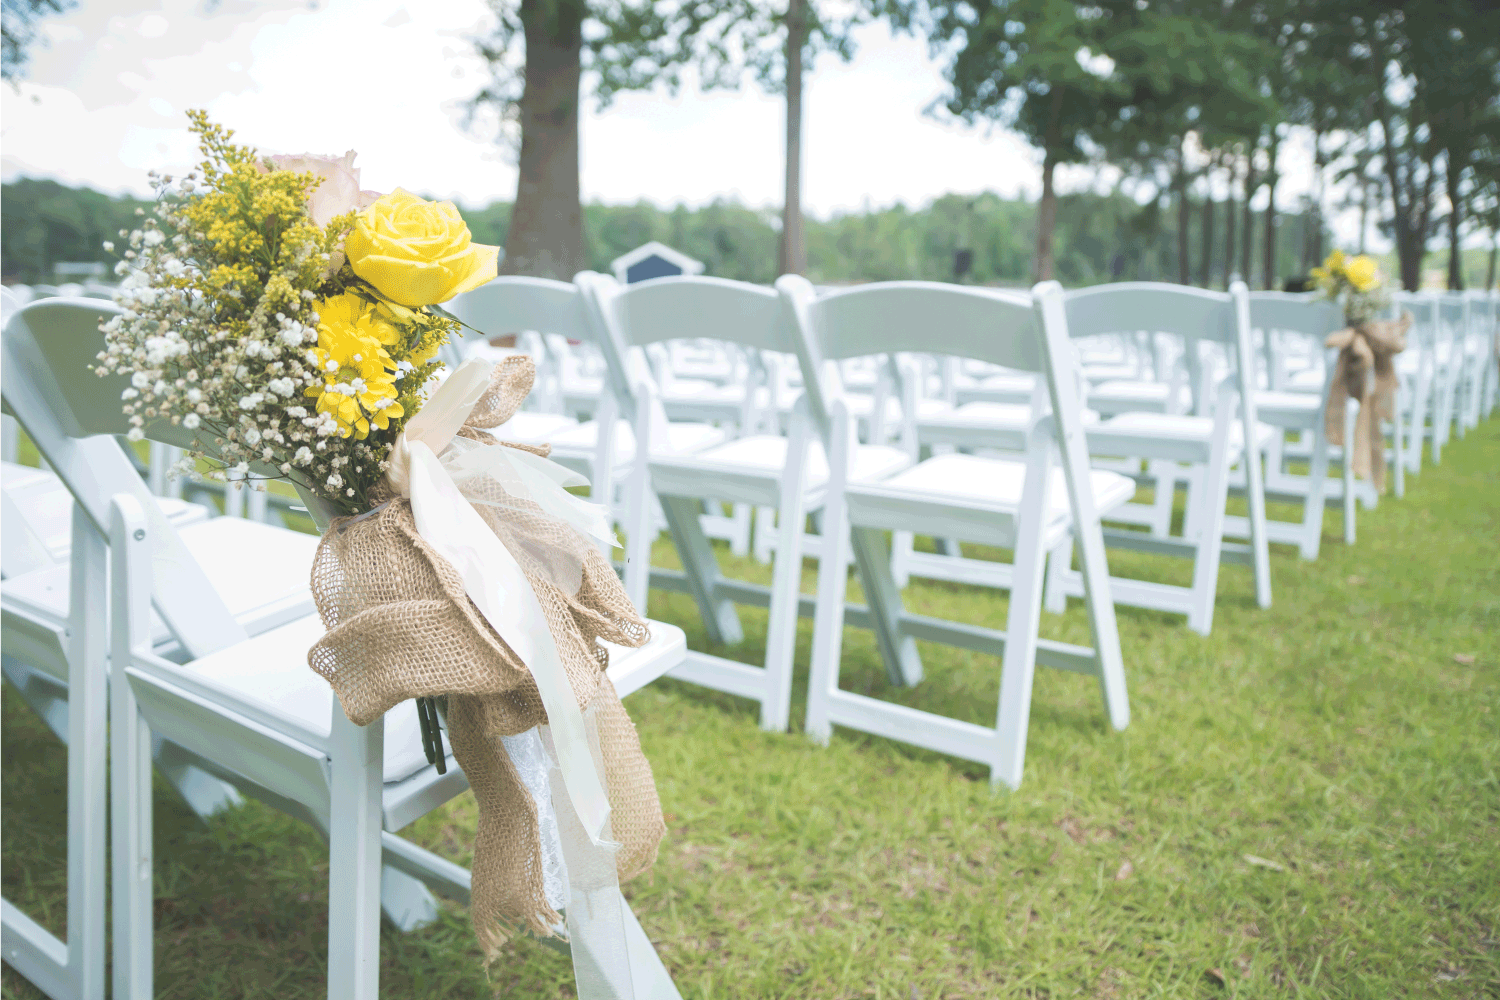 Pink and yellow flower arrangement with burlap and lace ribbon on white folding chair at wedding ceremony